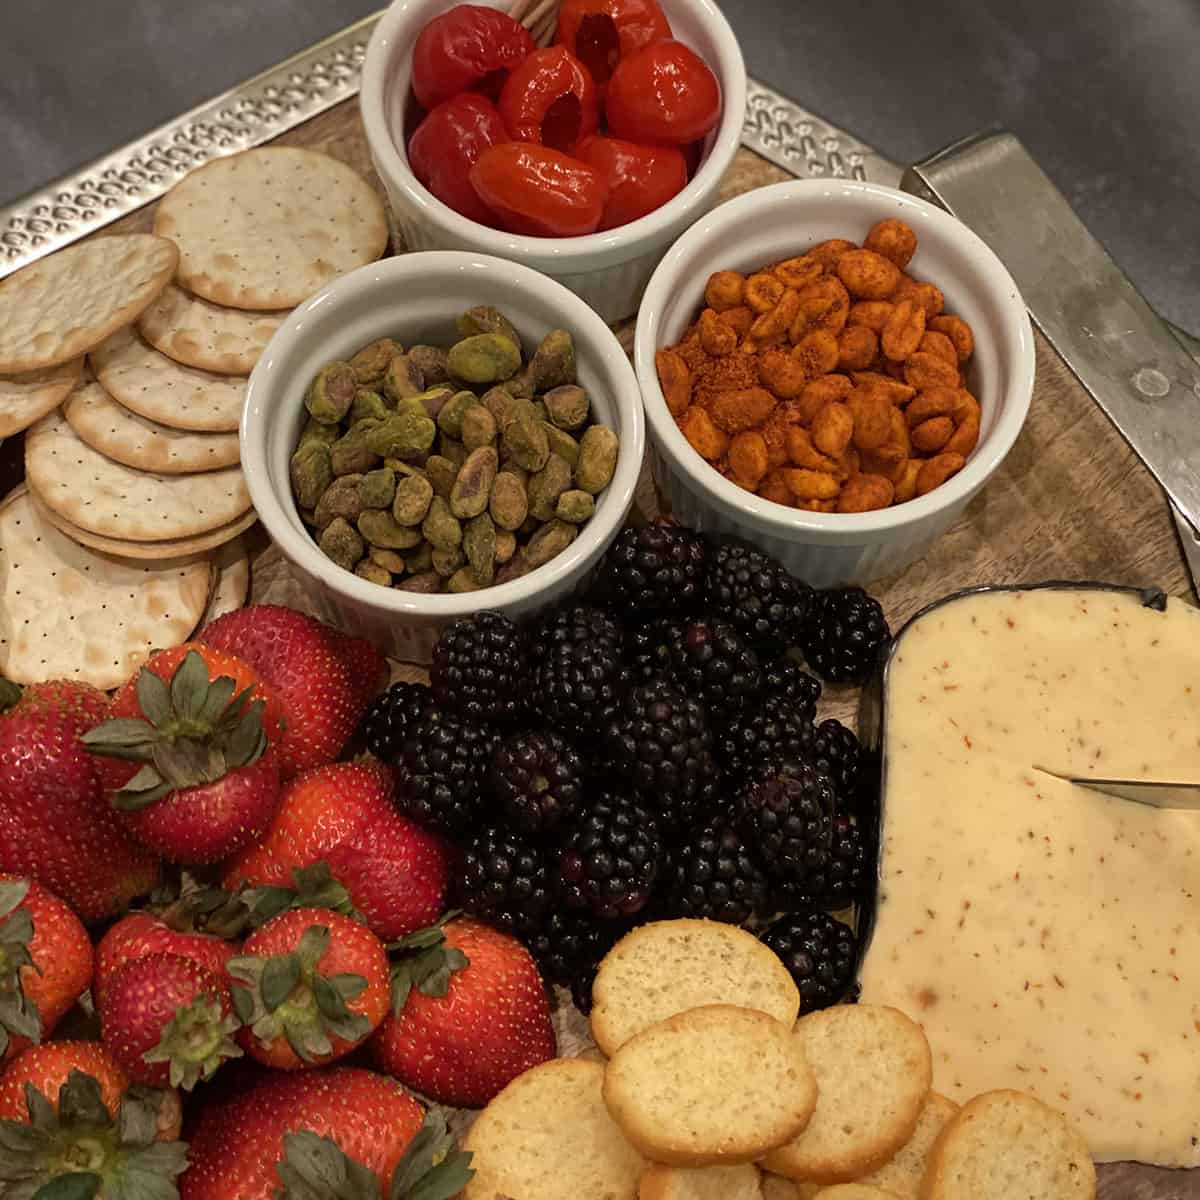 wood tray with silver rim, filled with red and blue berries, marinated red peppers, nuts and crackers